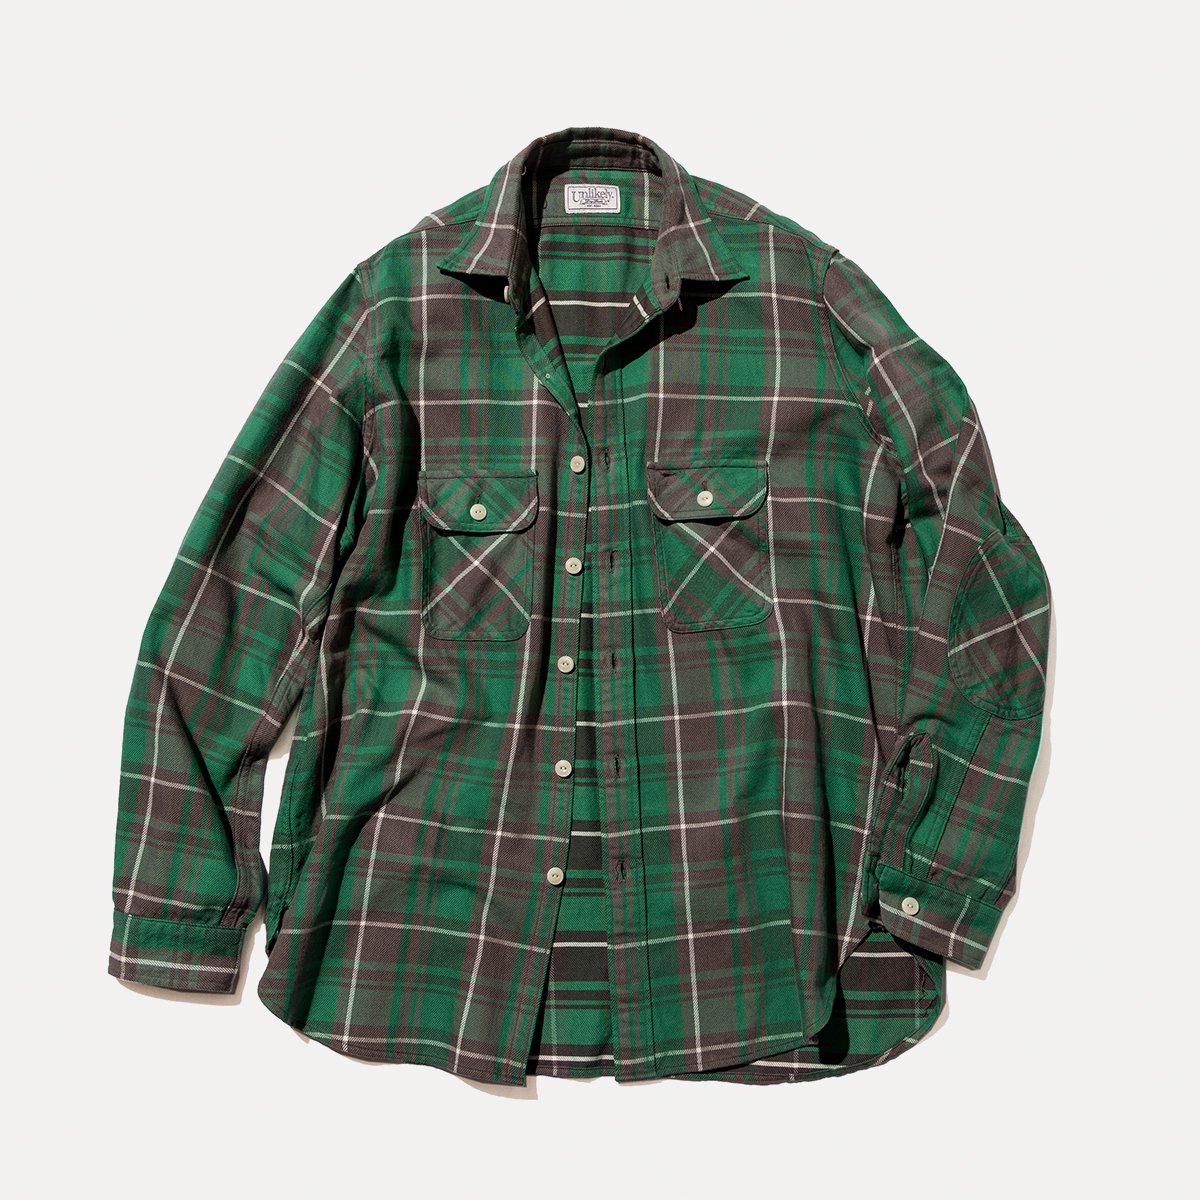 UNLIKELY ELBOW PATCH FLANNEL WORK SHIRT - 香川県高松市のセレクトショップ IHATOVE（イーハトーブ）  A.PRESSE,NEPENTHES,NICENESS,PORTER CLASSIC,WIRROWの通販